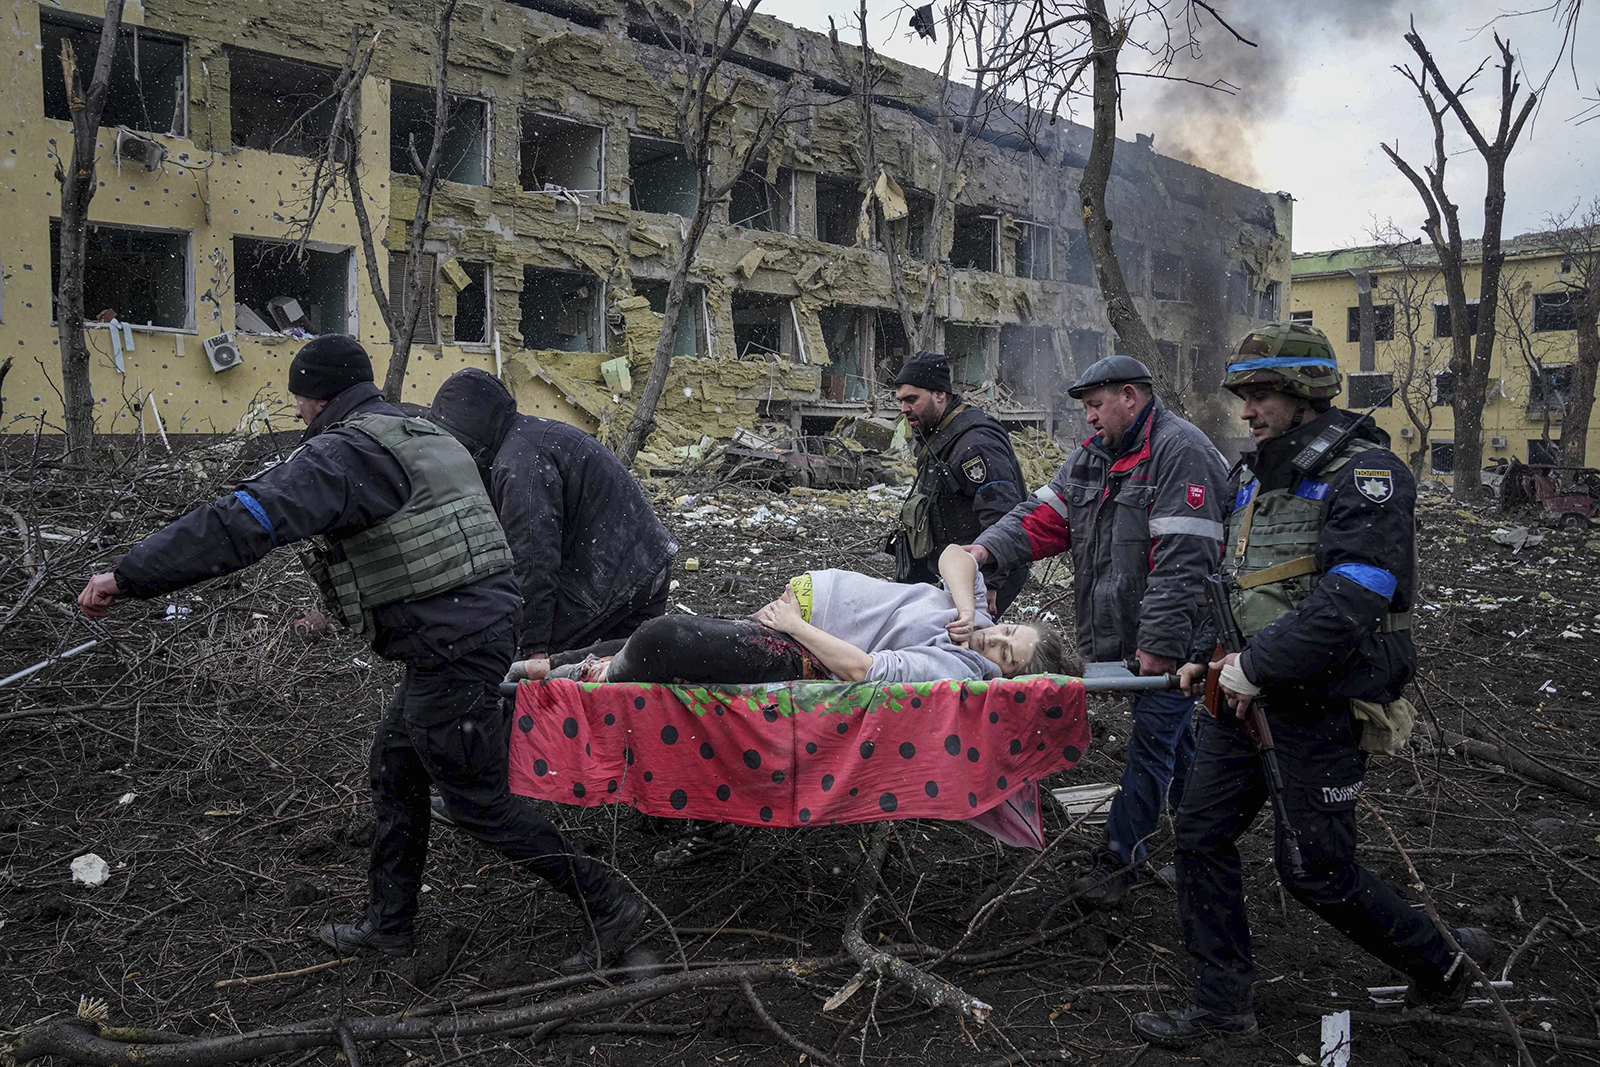 Ukrainian emergency employees and volunteers carry an injured pregnant woman from the maternity hospital in Mariupol, Ukraine, on March 9. It has now been confirmed that both mother and baby have died.